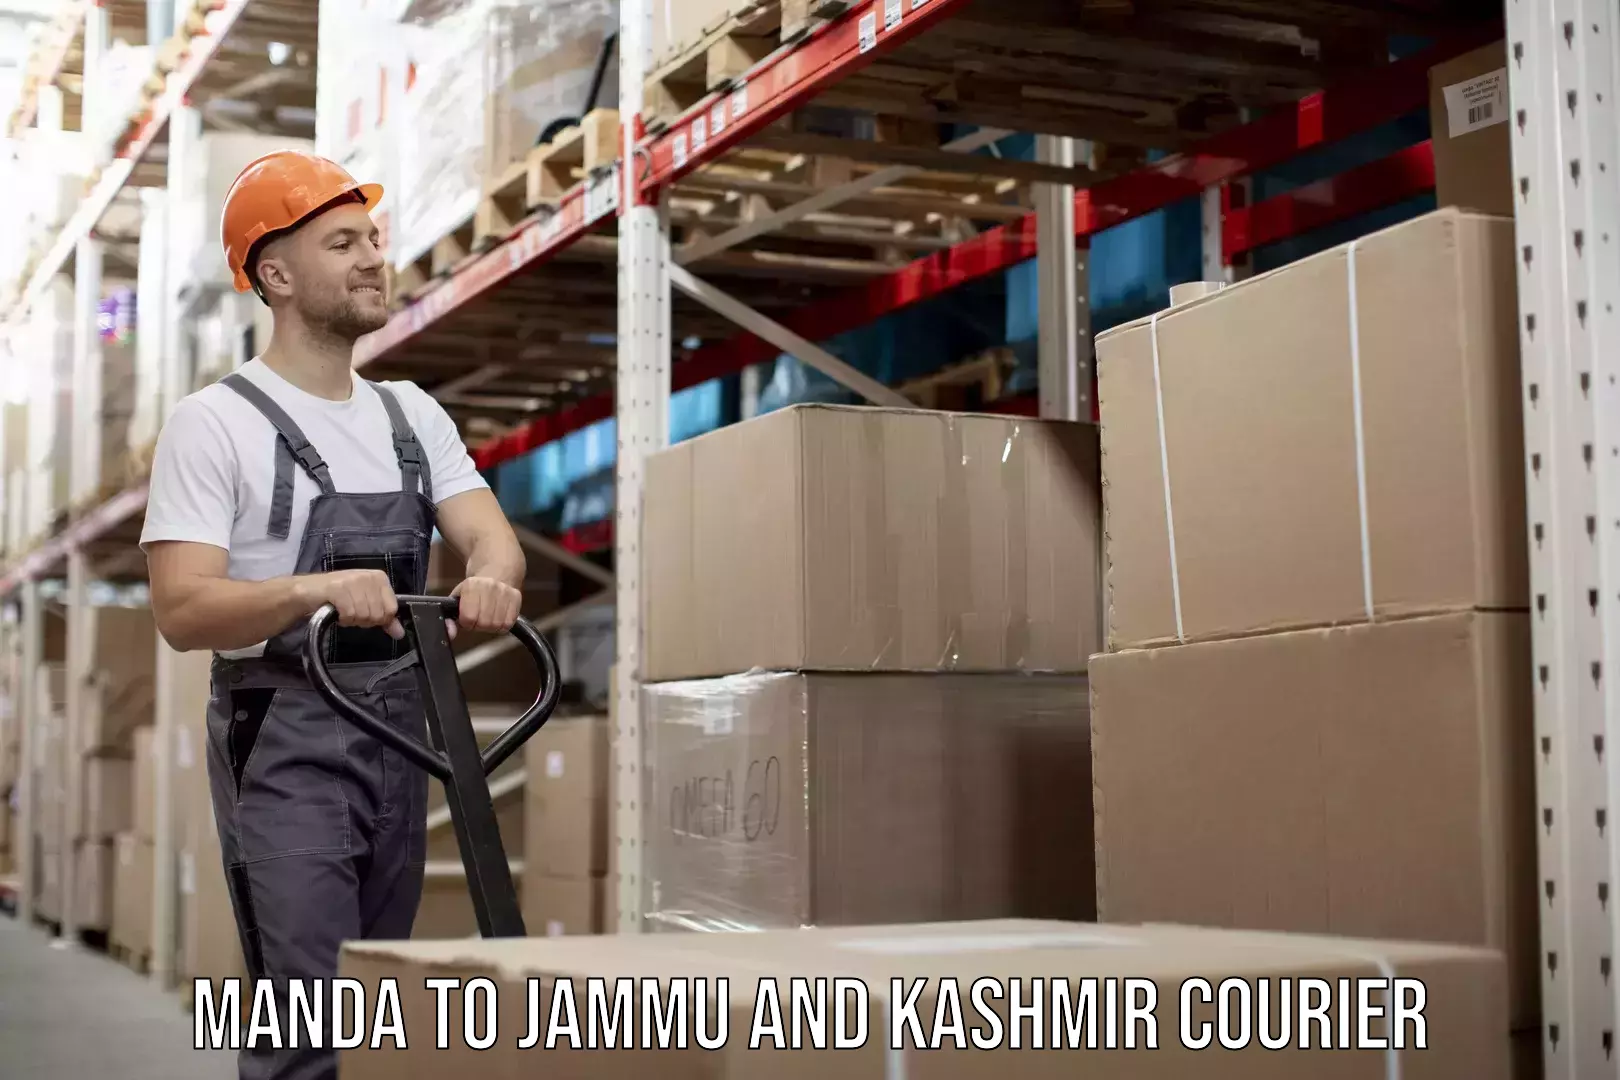 Furniture moving specialists Manda to Jammu and Kashmir